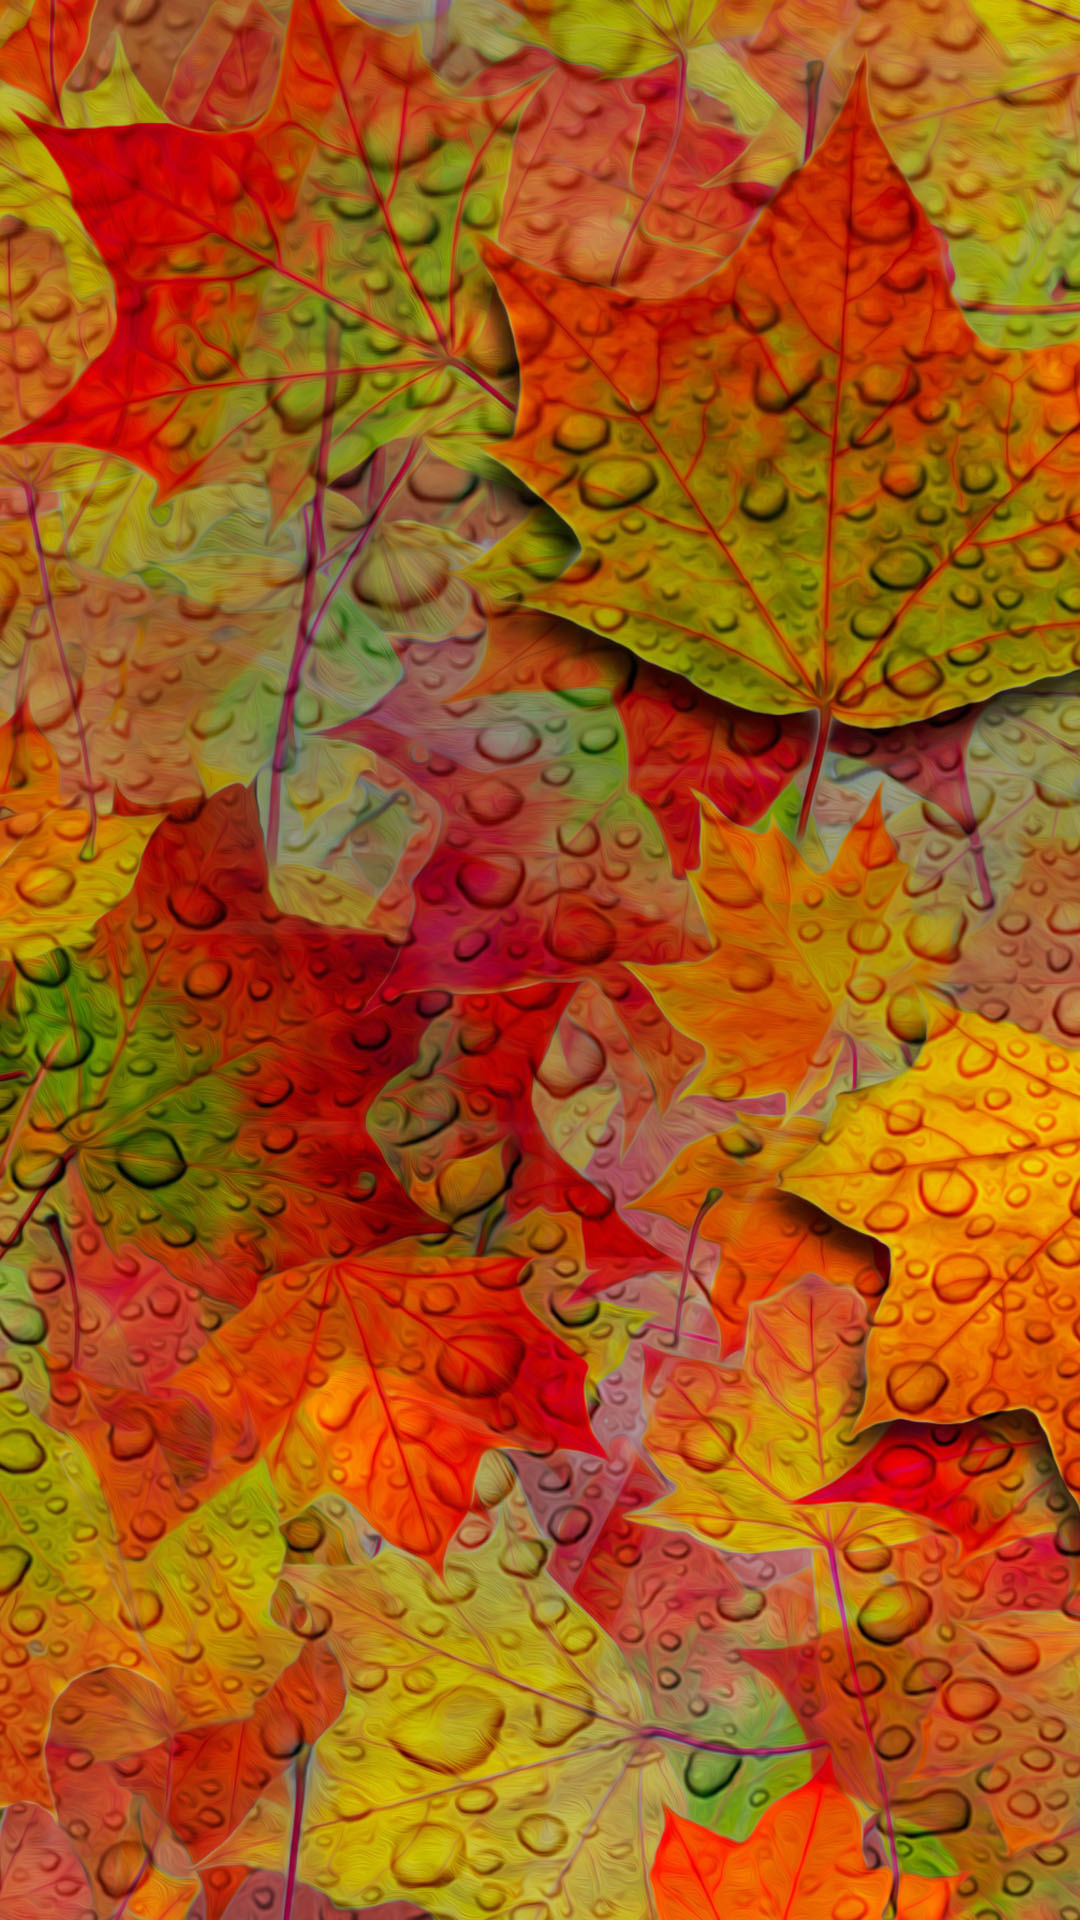 Fall Leaves HD Wallpaper For Your iPhone Plus And